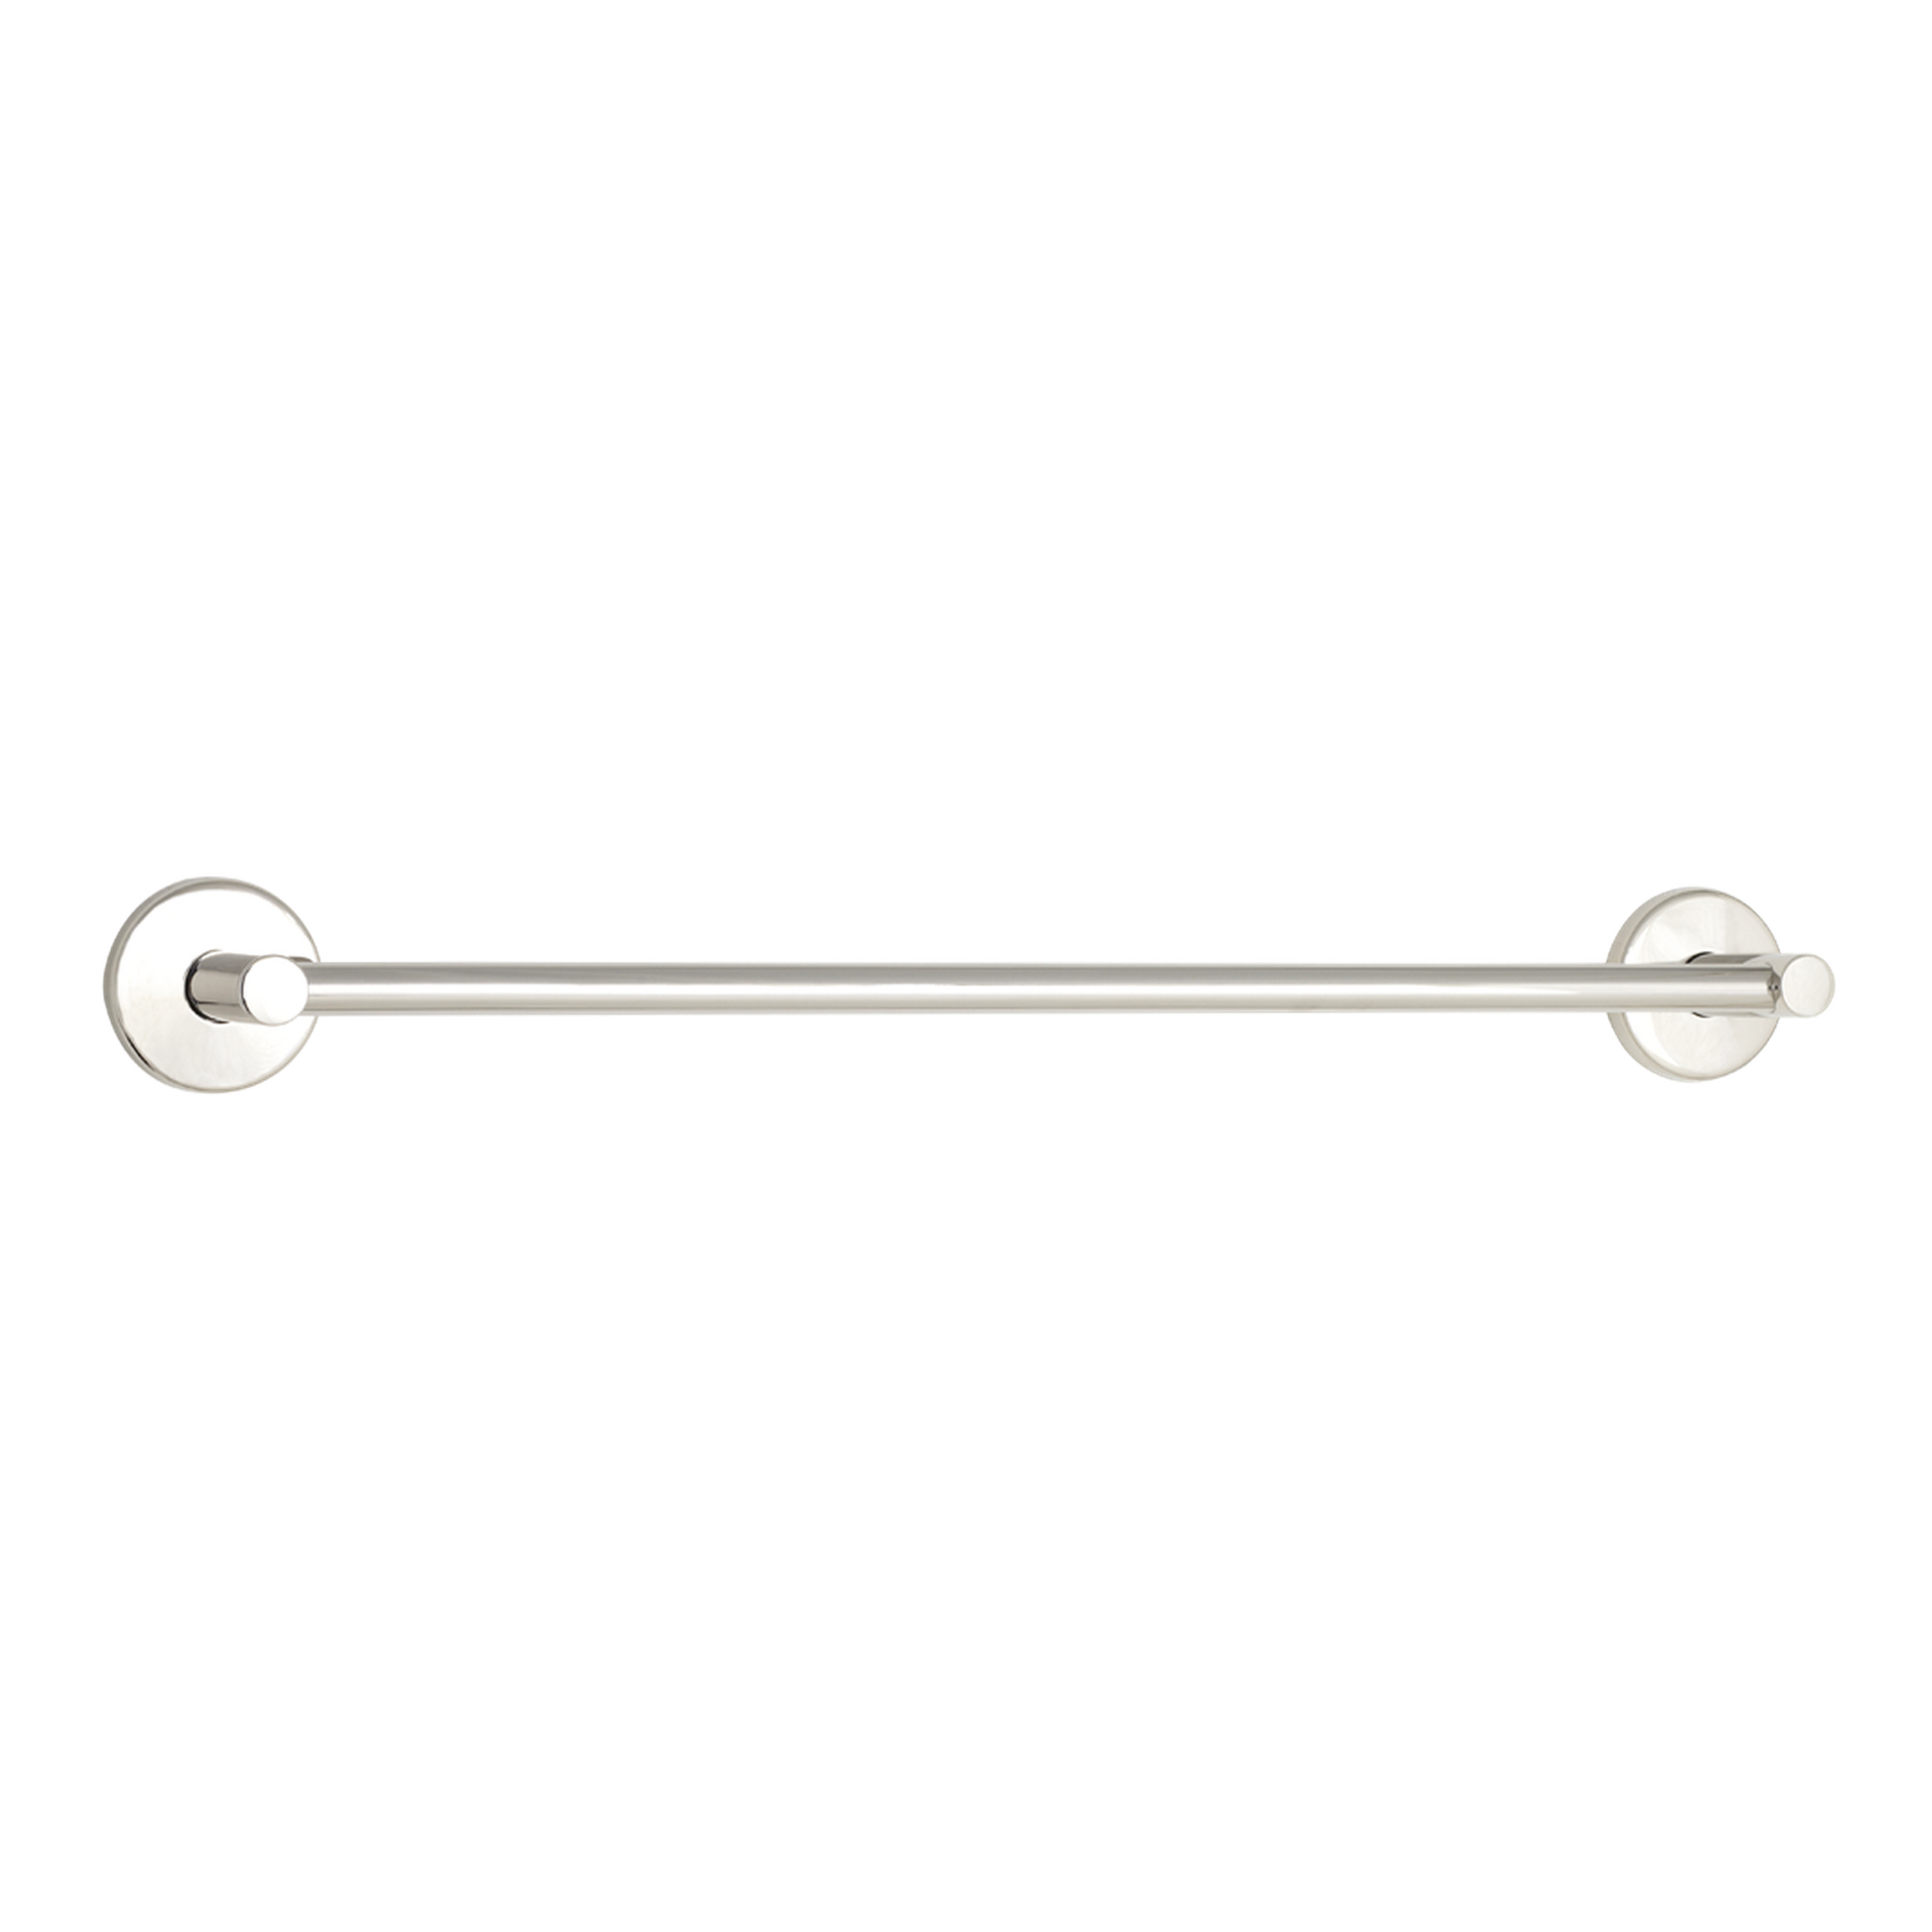 Seachrome Conorado Series 36" Satin Stainless Steel Concealed Mounting Flange Single Towel Bar